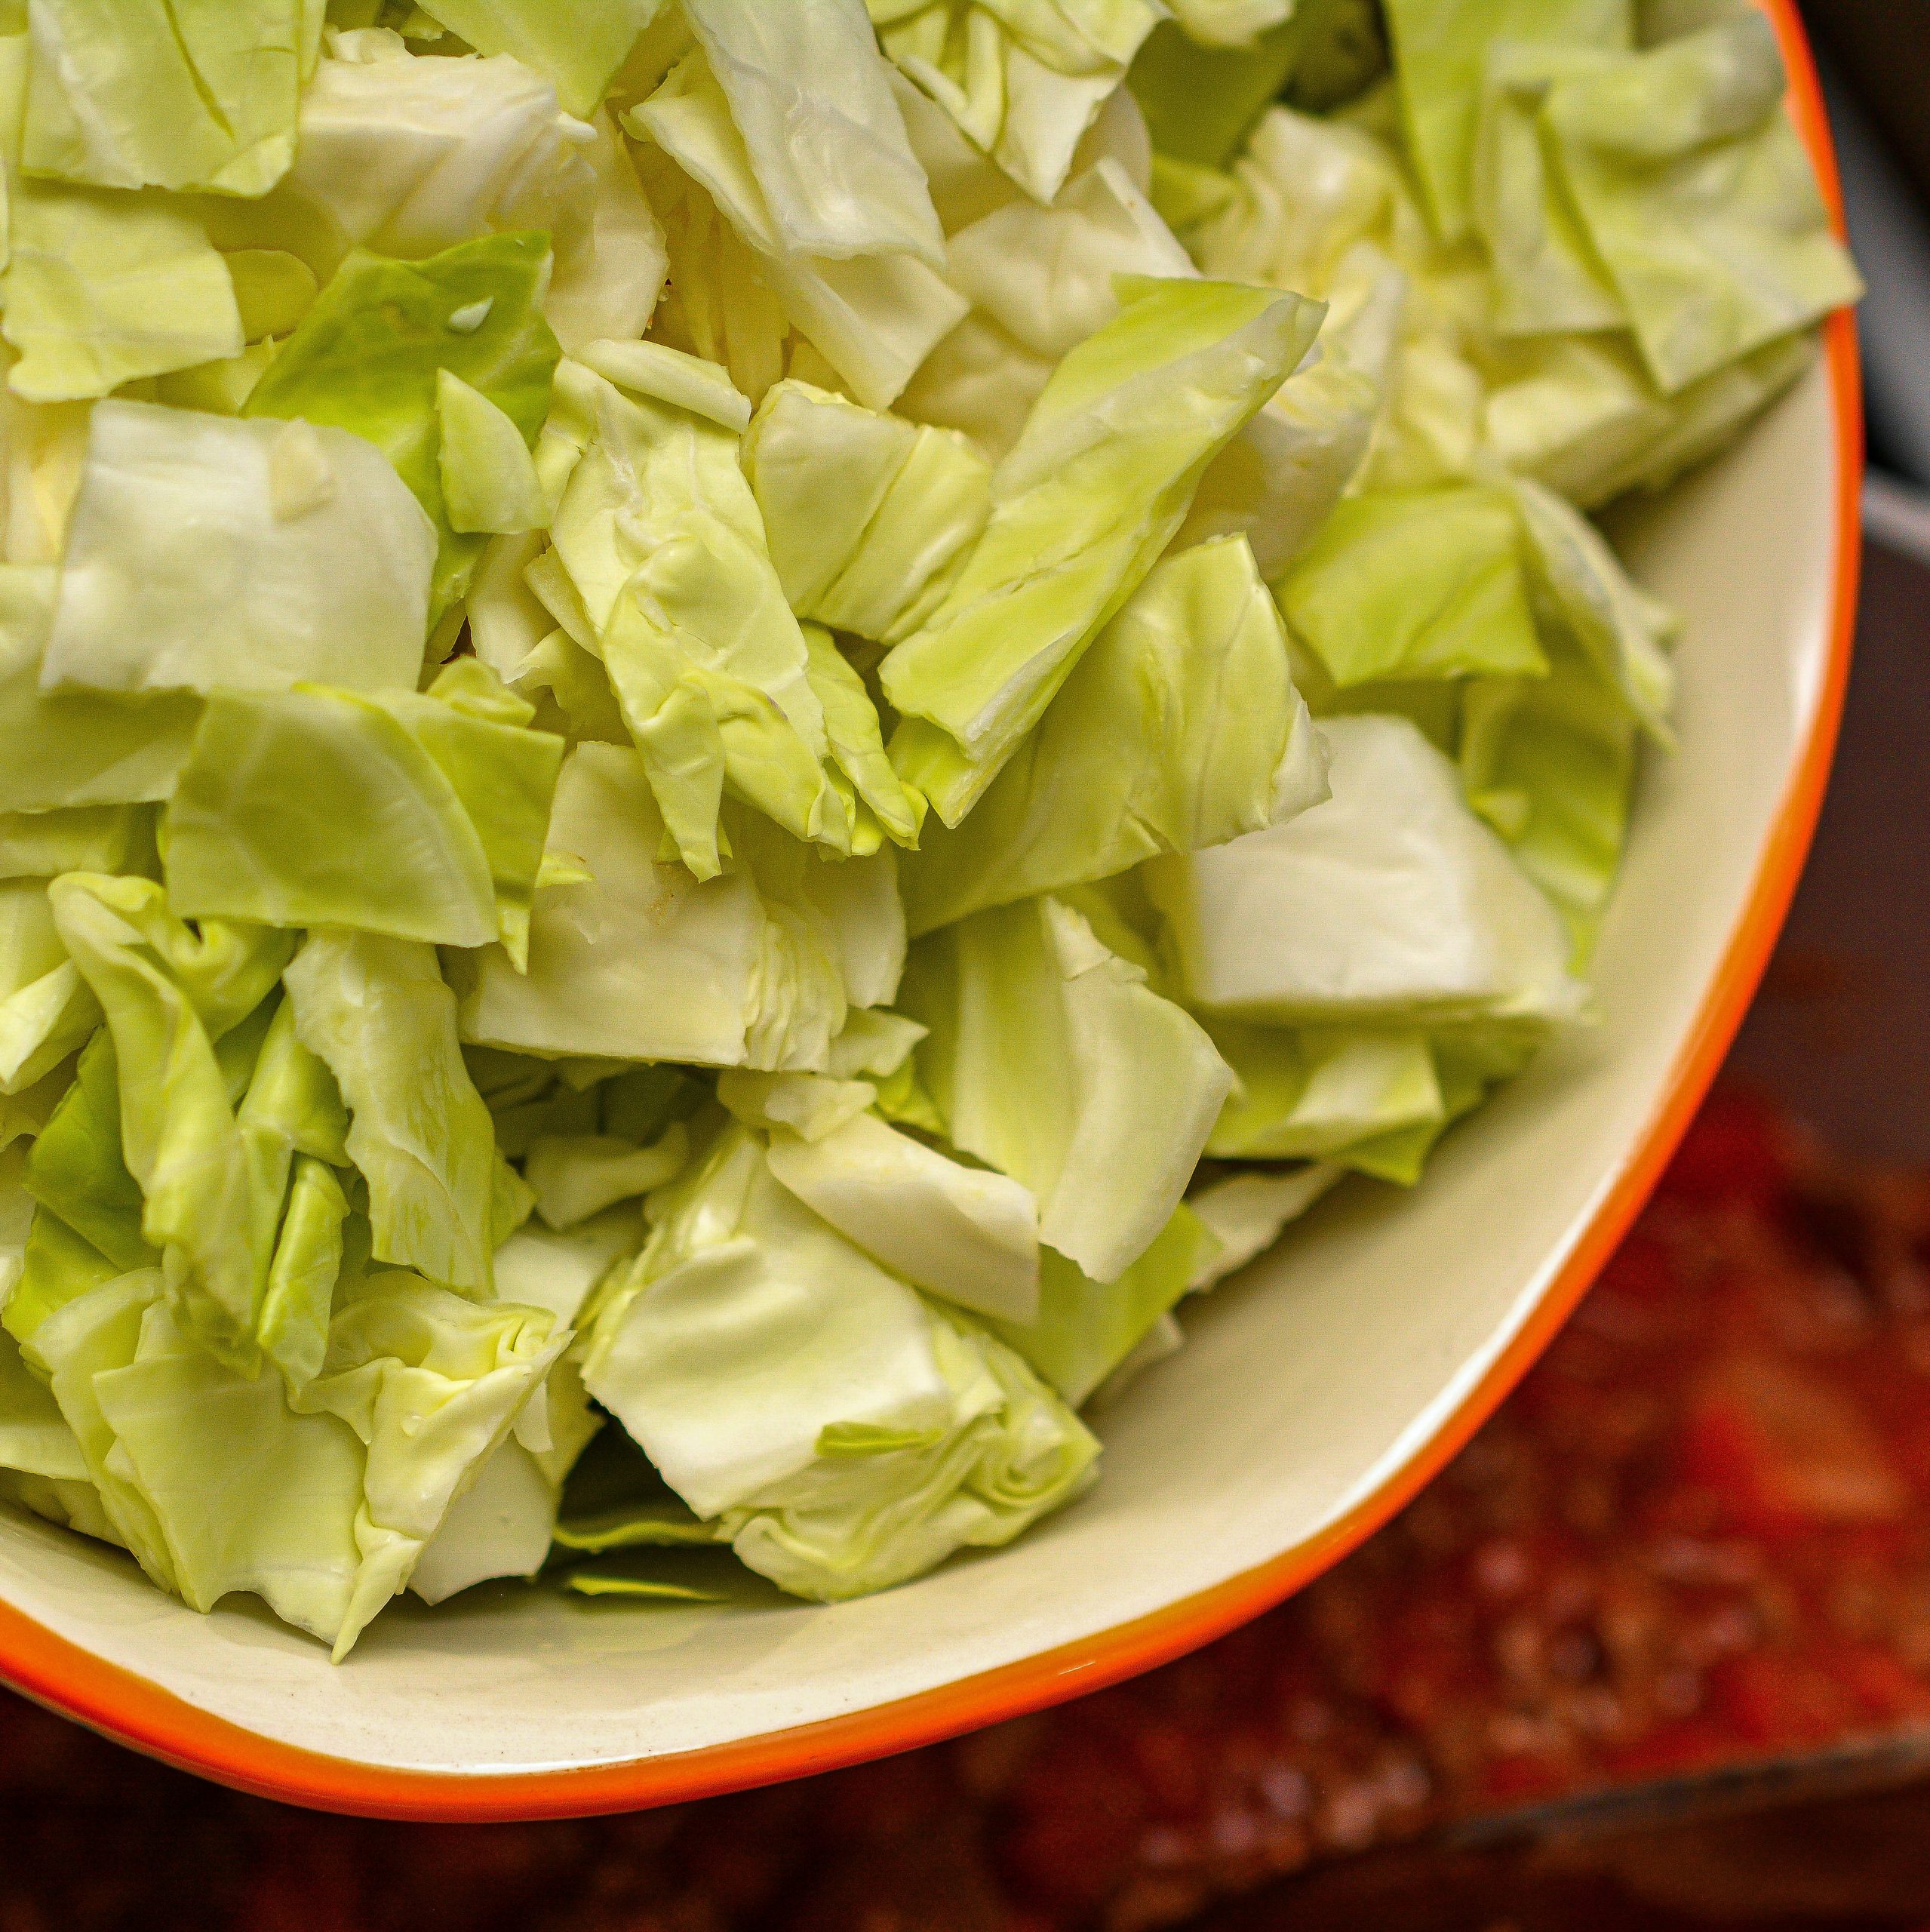 add the cabbage along with salt and pepper to taste, and stir to combine.